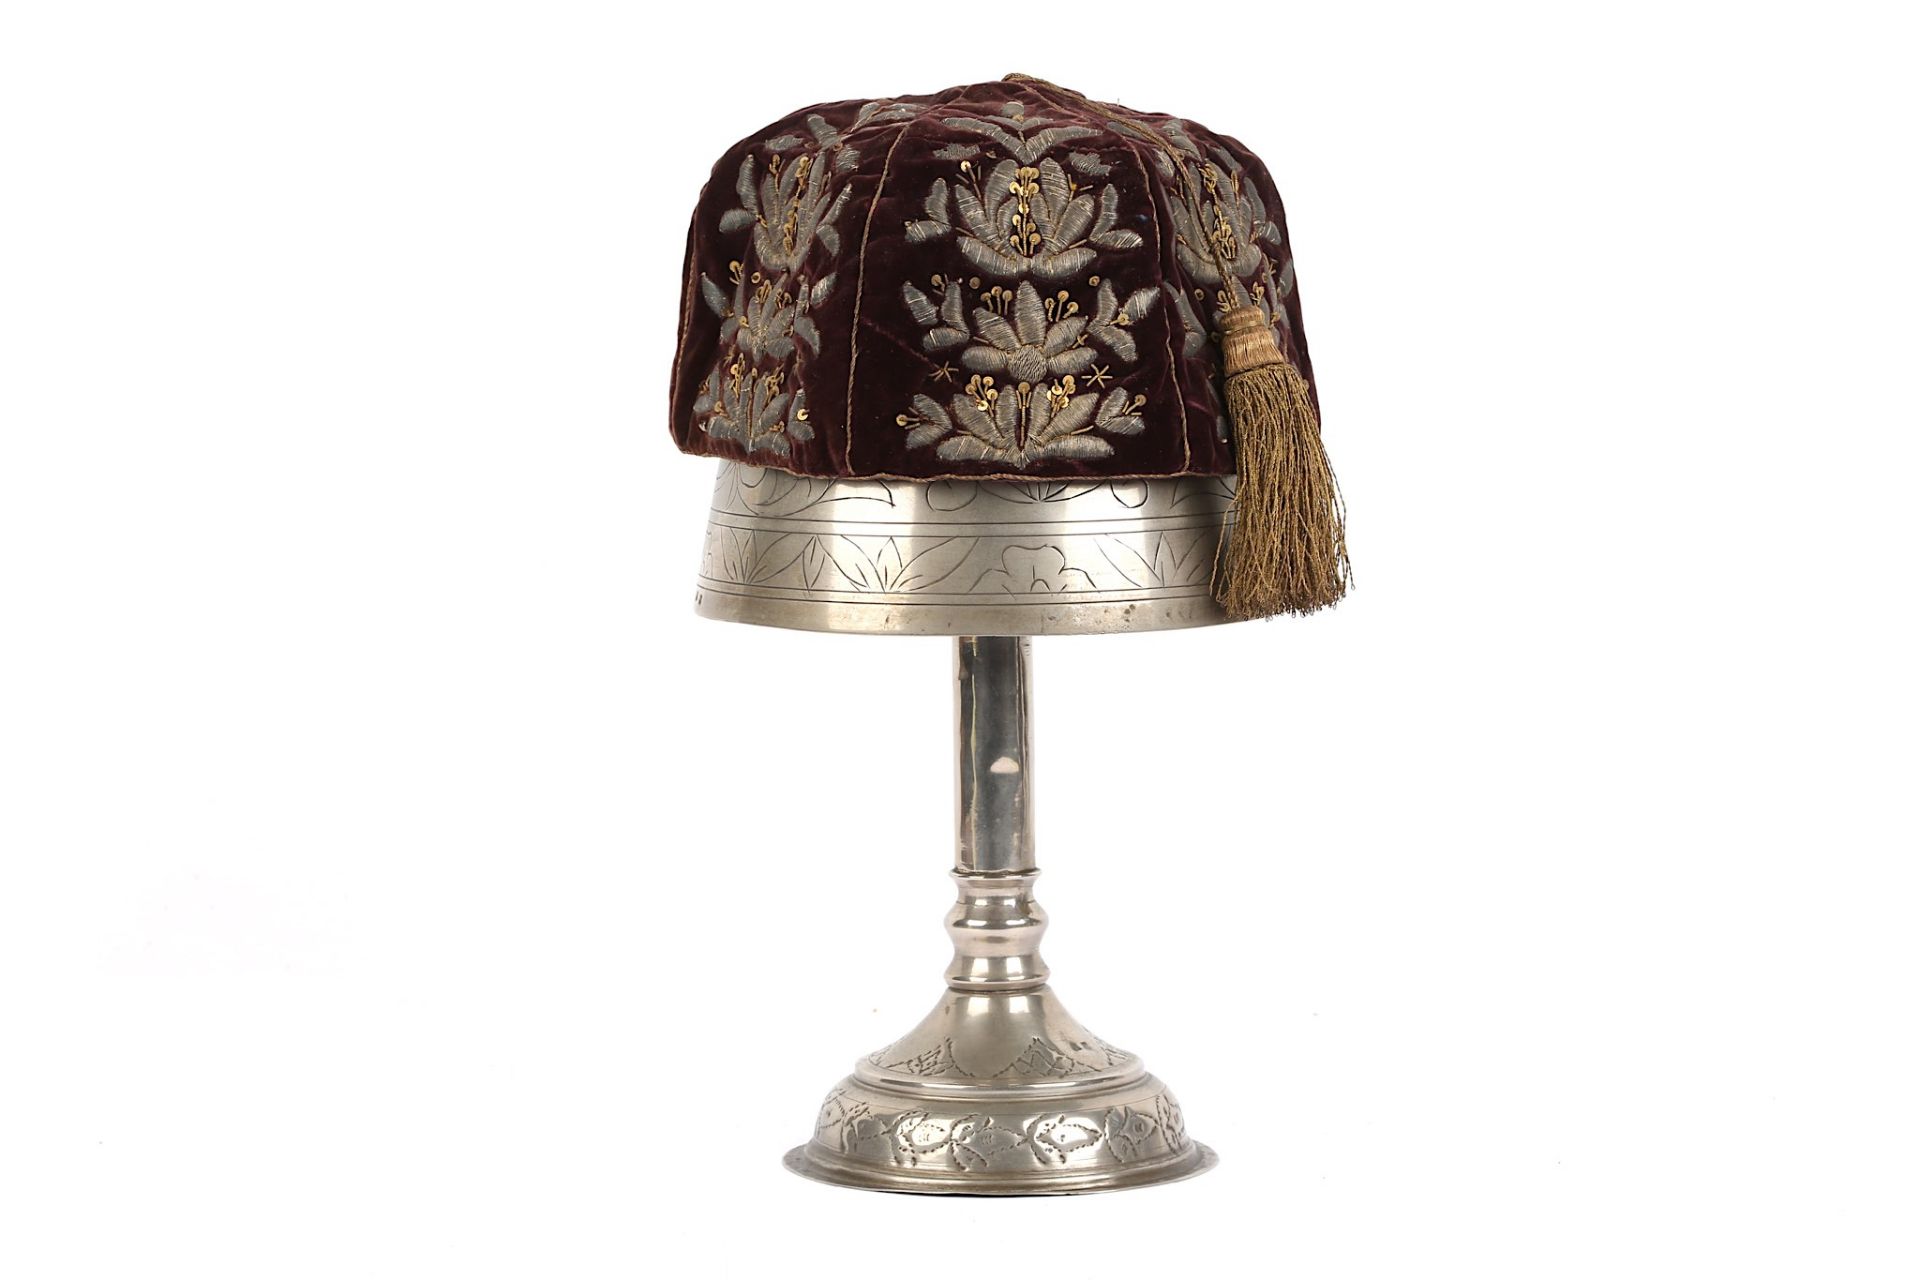 AN OTTOMAN SILVER FEZ STAND AND SIX-SIDED CAP Otto - Image 2 of 3